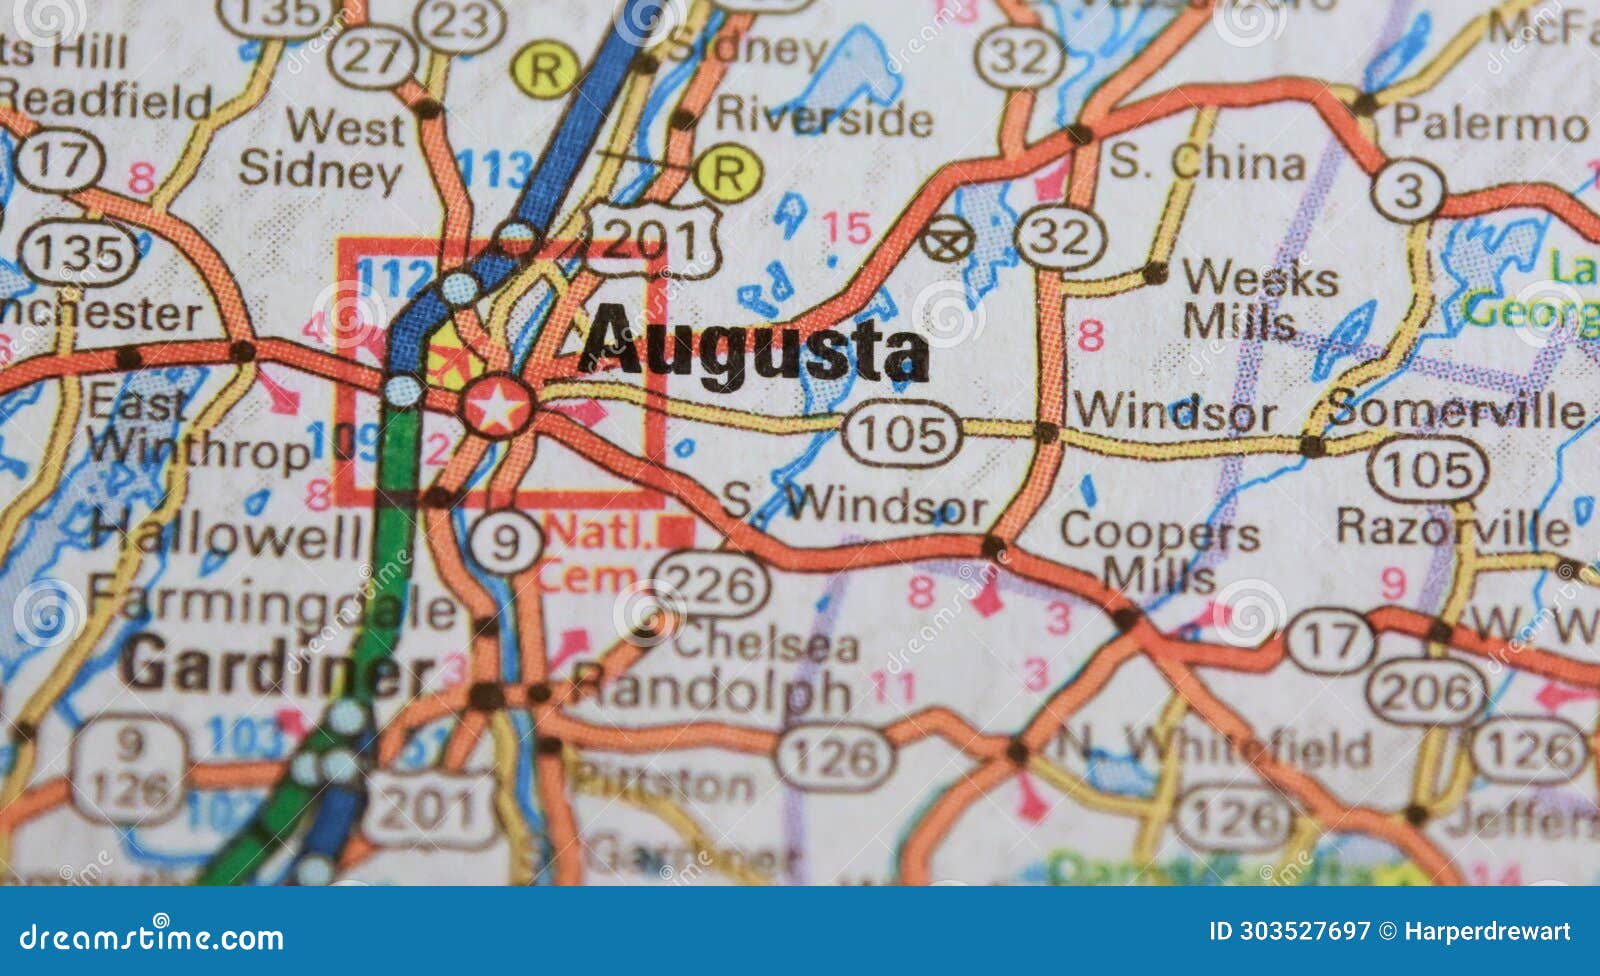 map image of augusta, maine